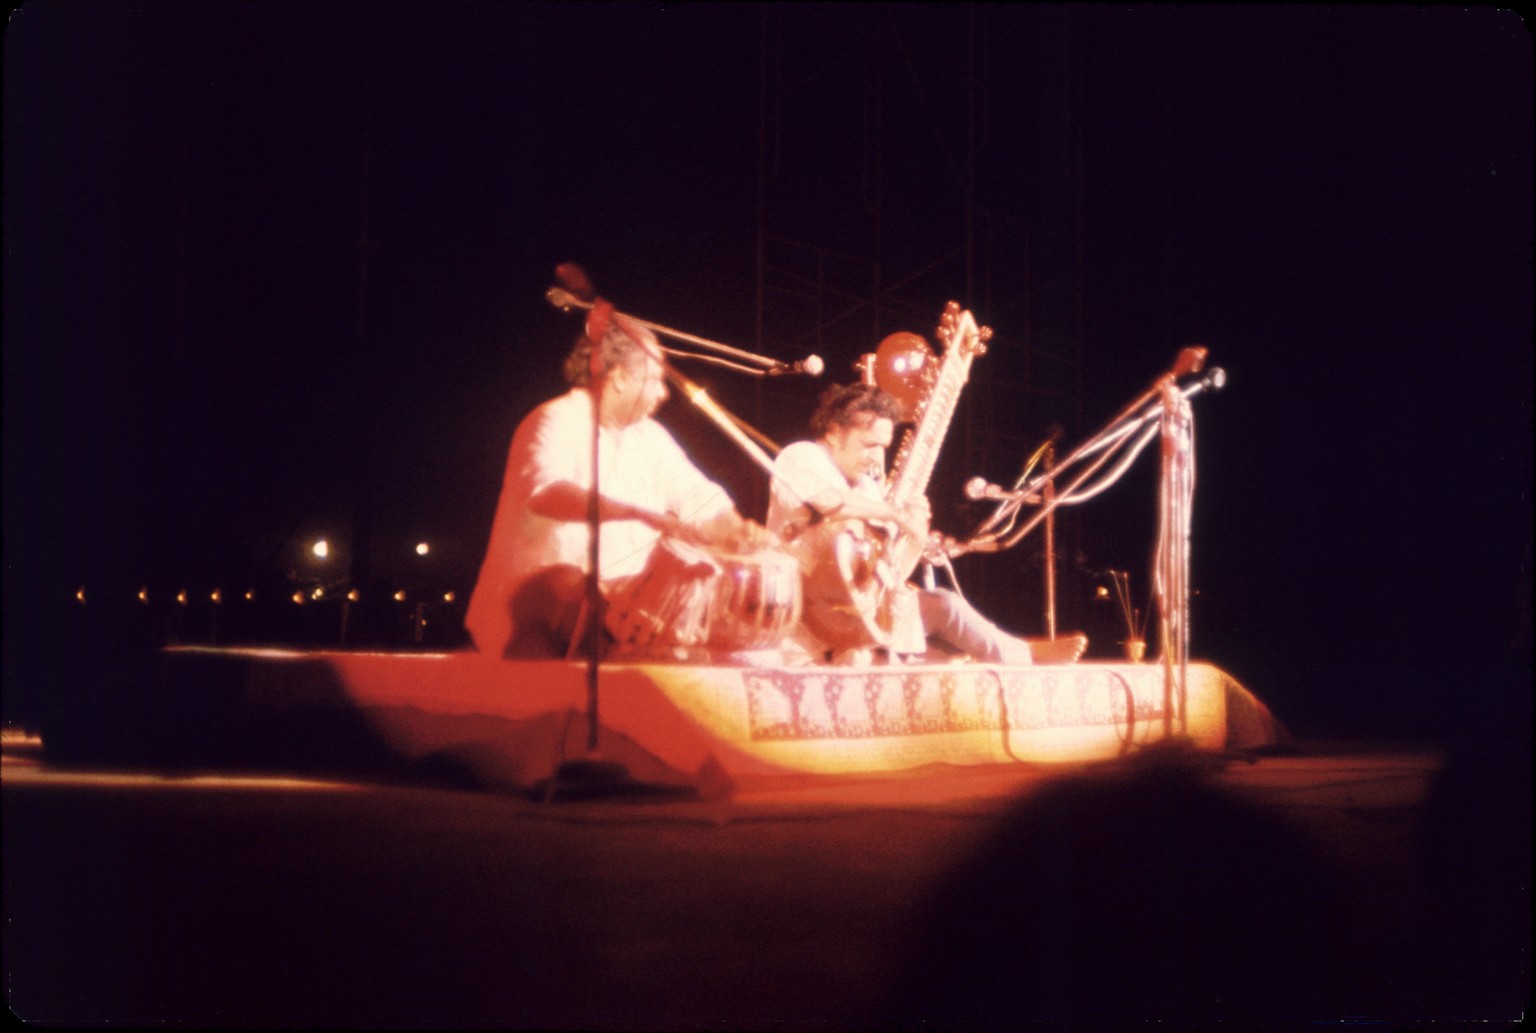 Indian musicians Ravi Shankar (center) and Alla Rakha (1919 - 2000) (left) perform on stage at the Woodstock Music and Arts Fair, Bethel, New York, August 15, 1969. With them, though obscured, is fell ...